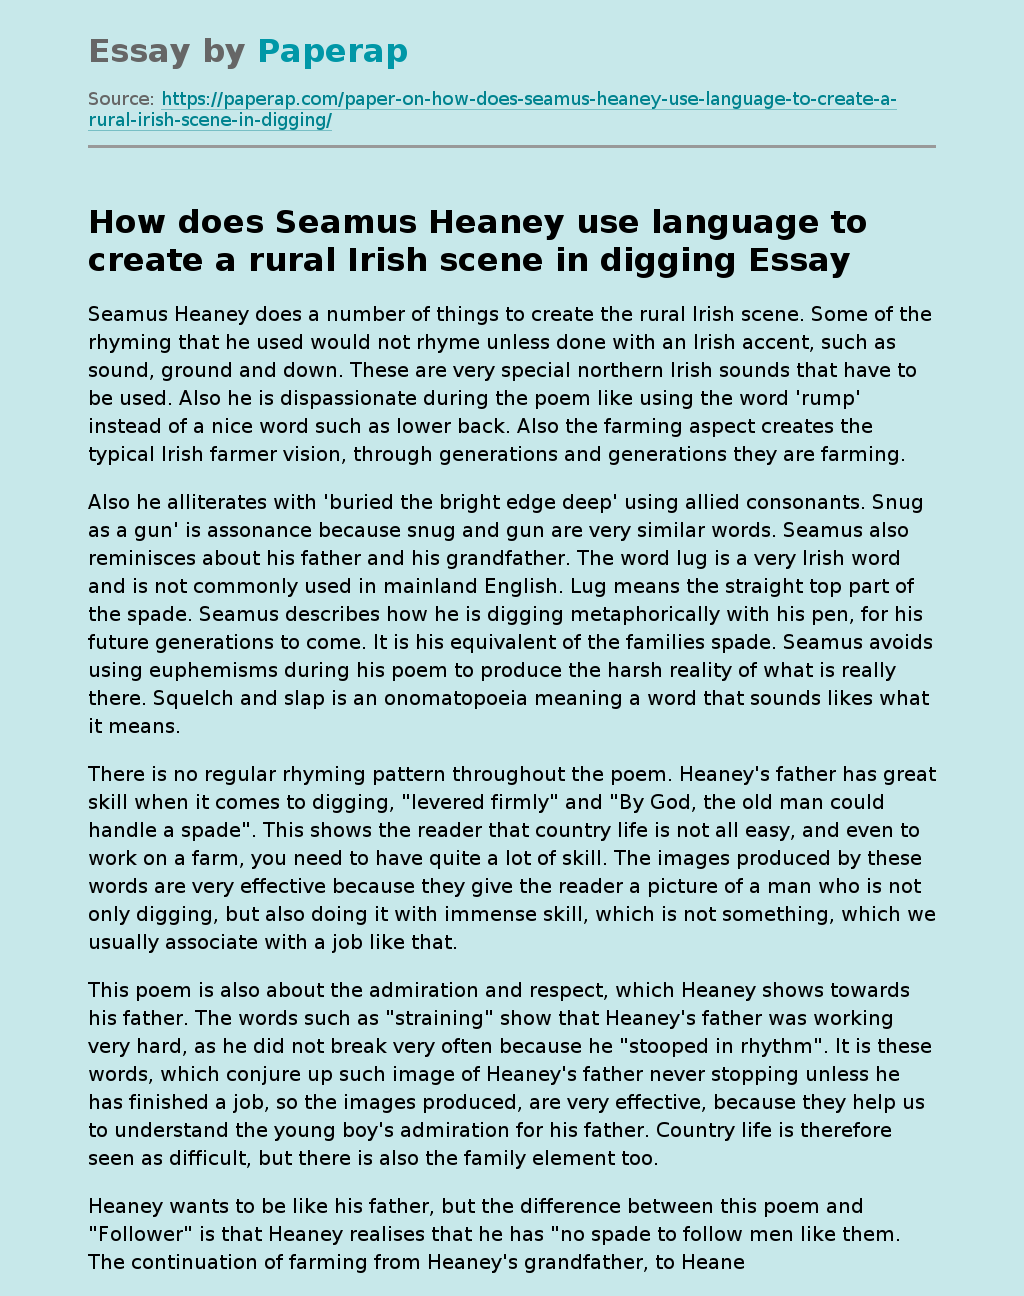 How does Seamus Heaney use language to create a rural Irish scene in digging